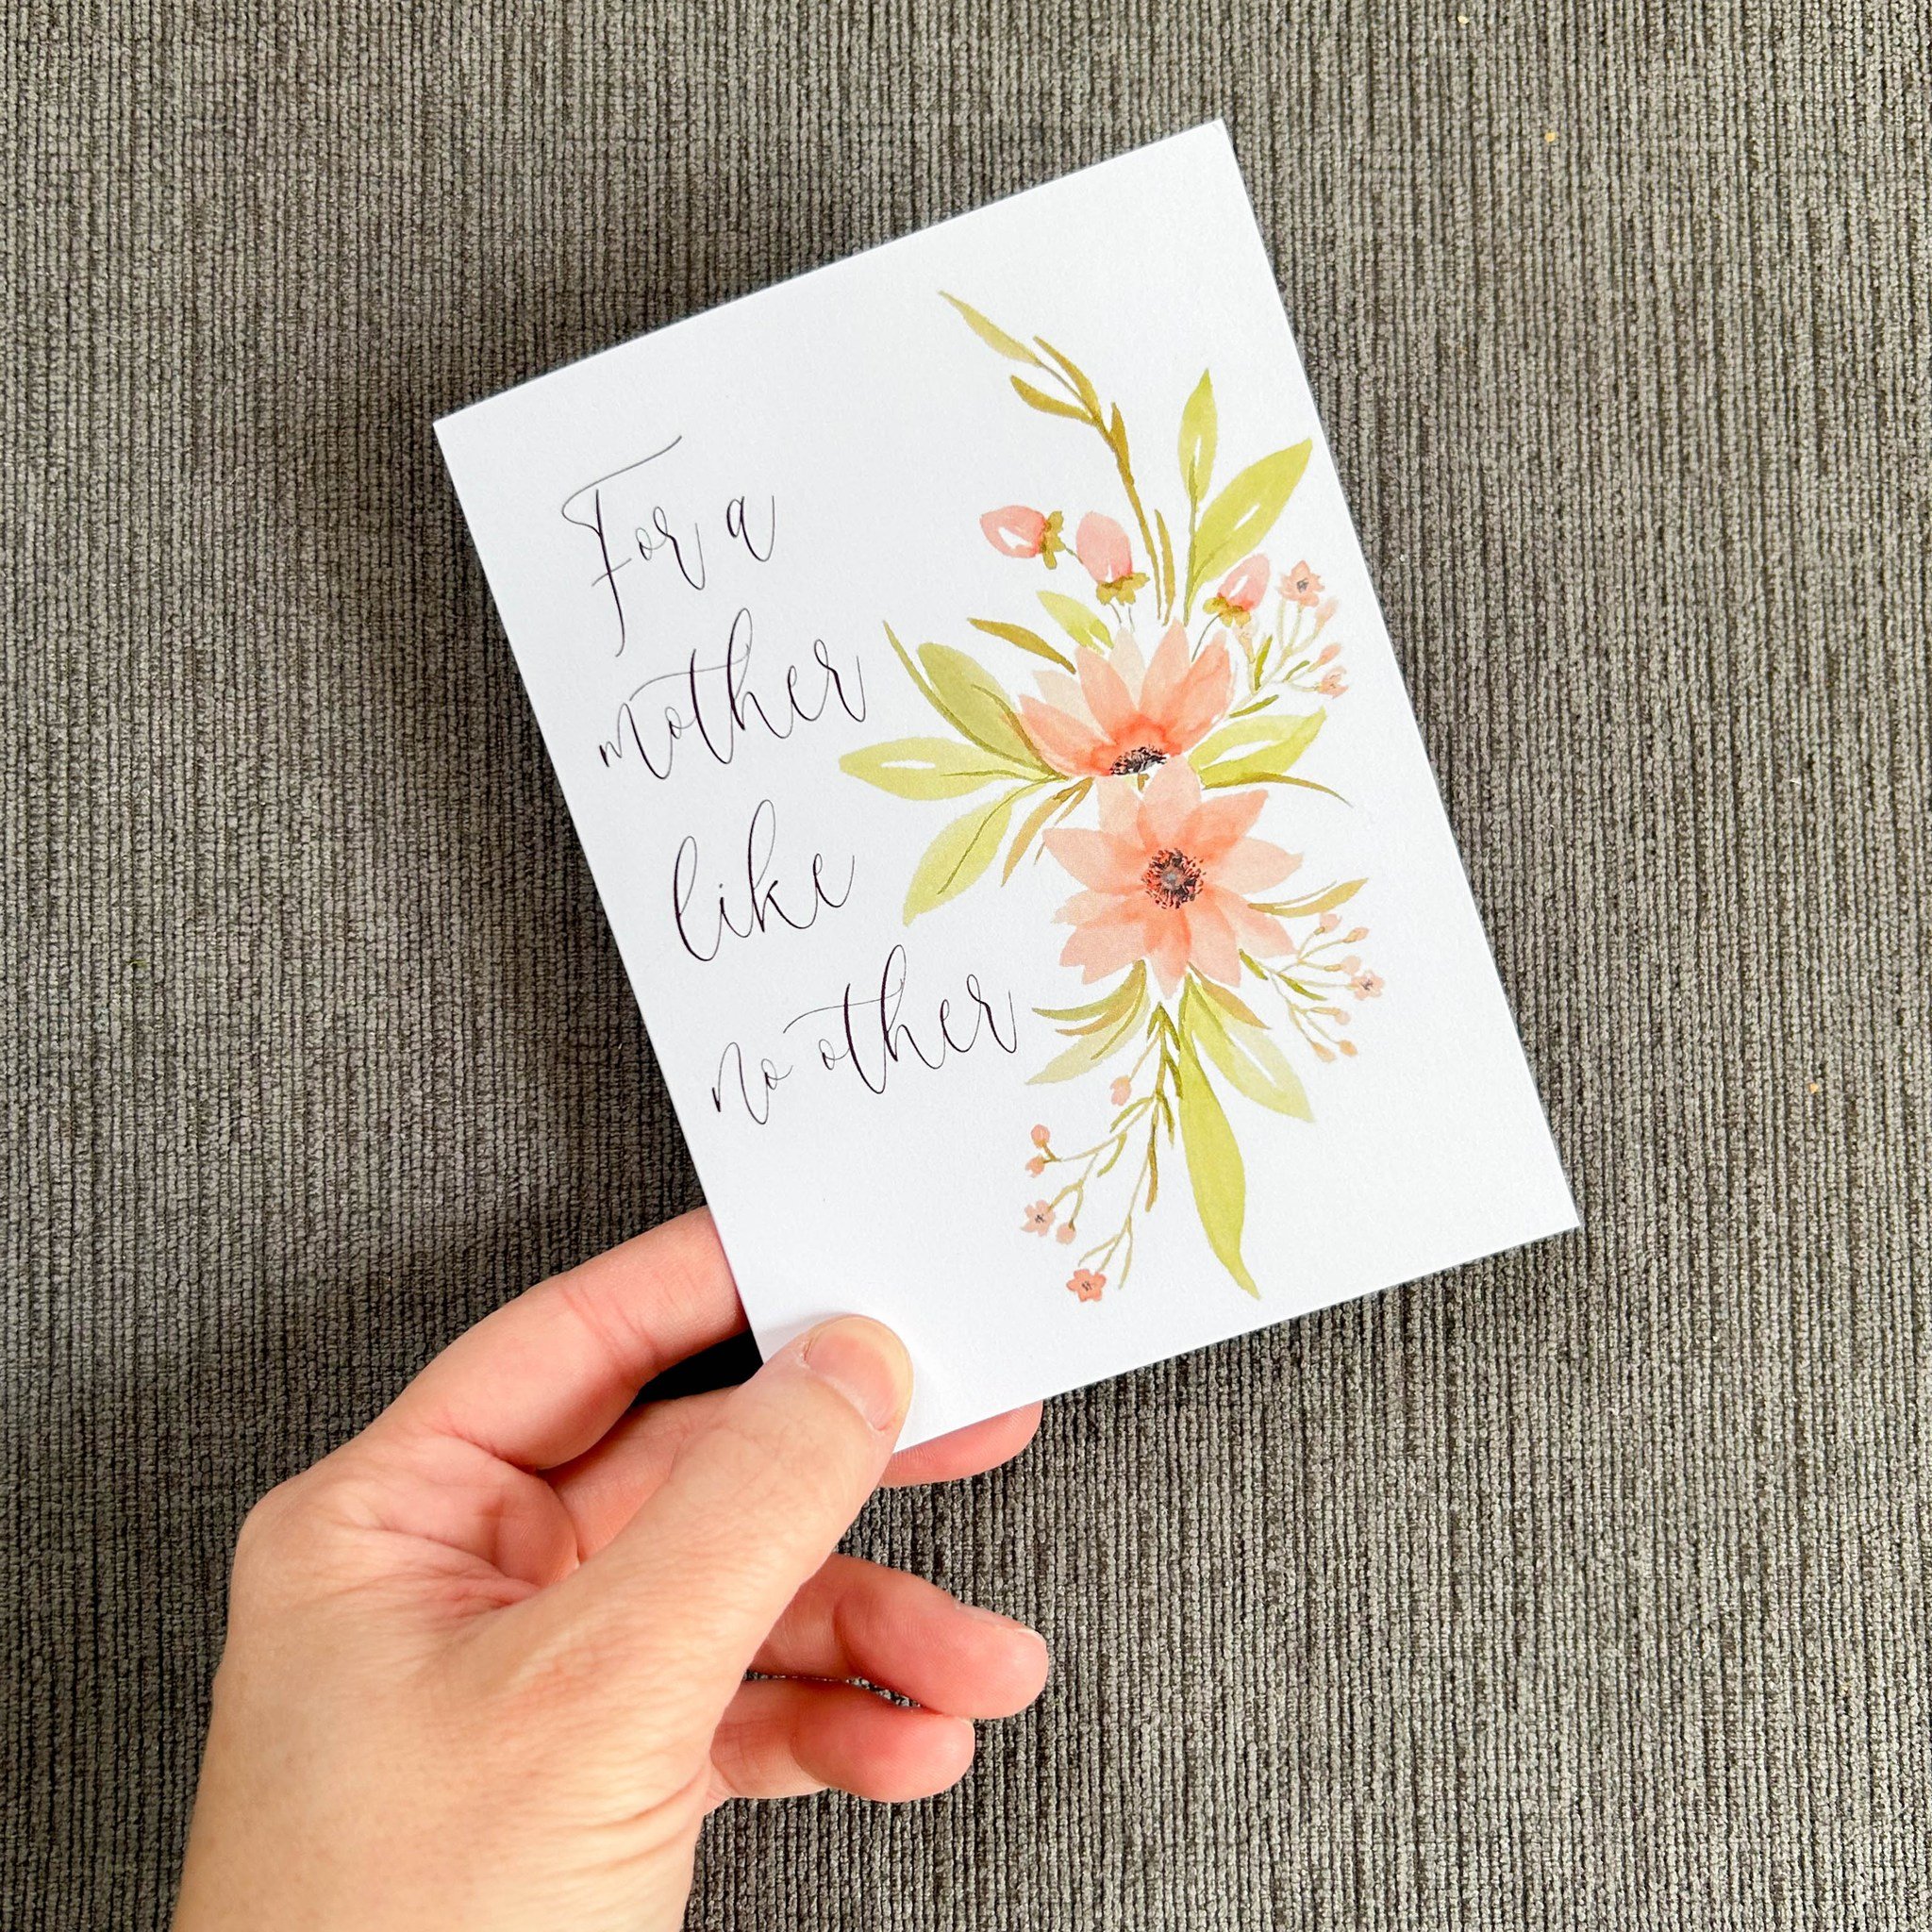 Because your mother is like no other ❤️

#mothersday #happymothersday #mothersdaycard #motherlikenoother #cafenotesandcompany #cafenotesco #watercolorstationery #snailmailart #greetingcards #shopsmall #womanowned